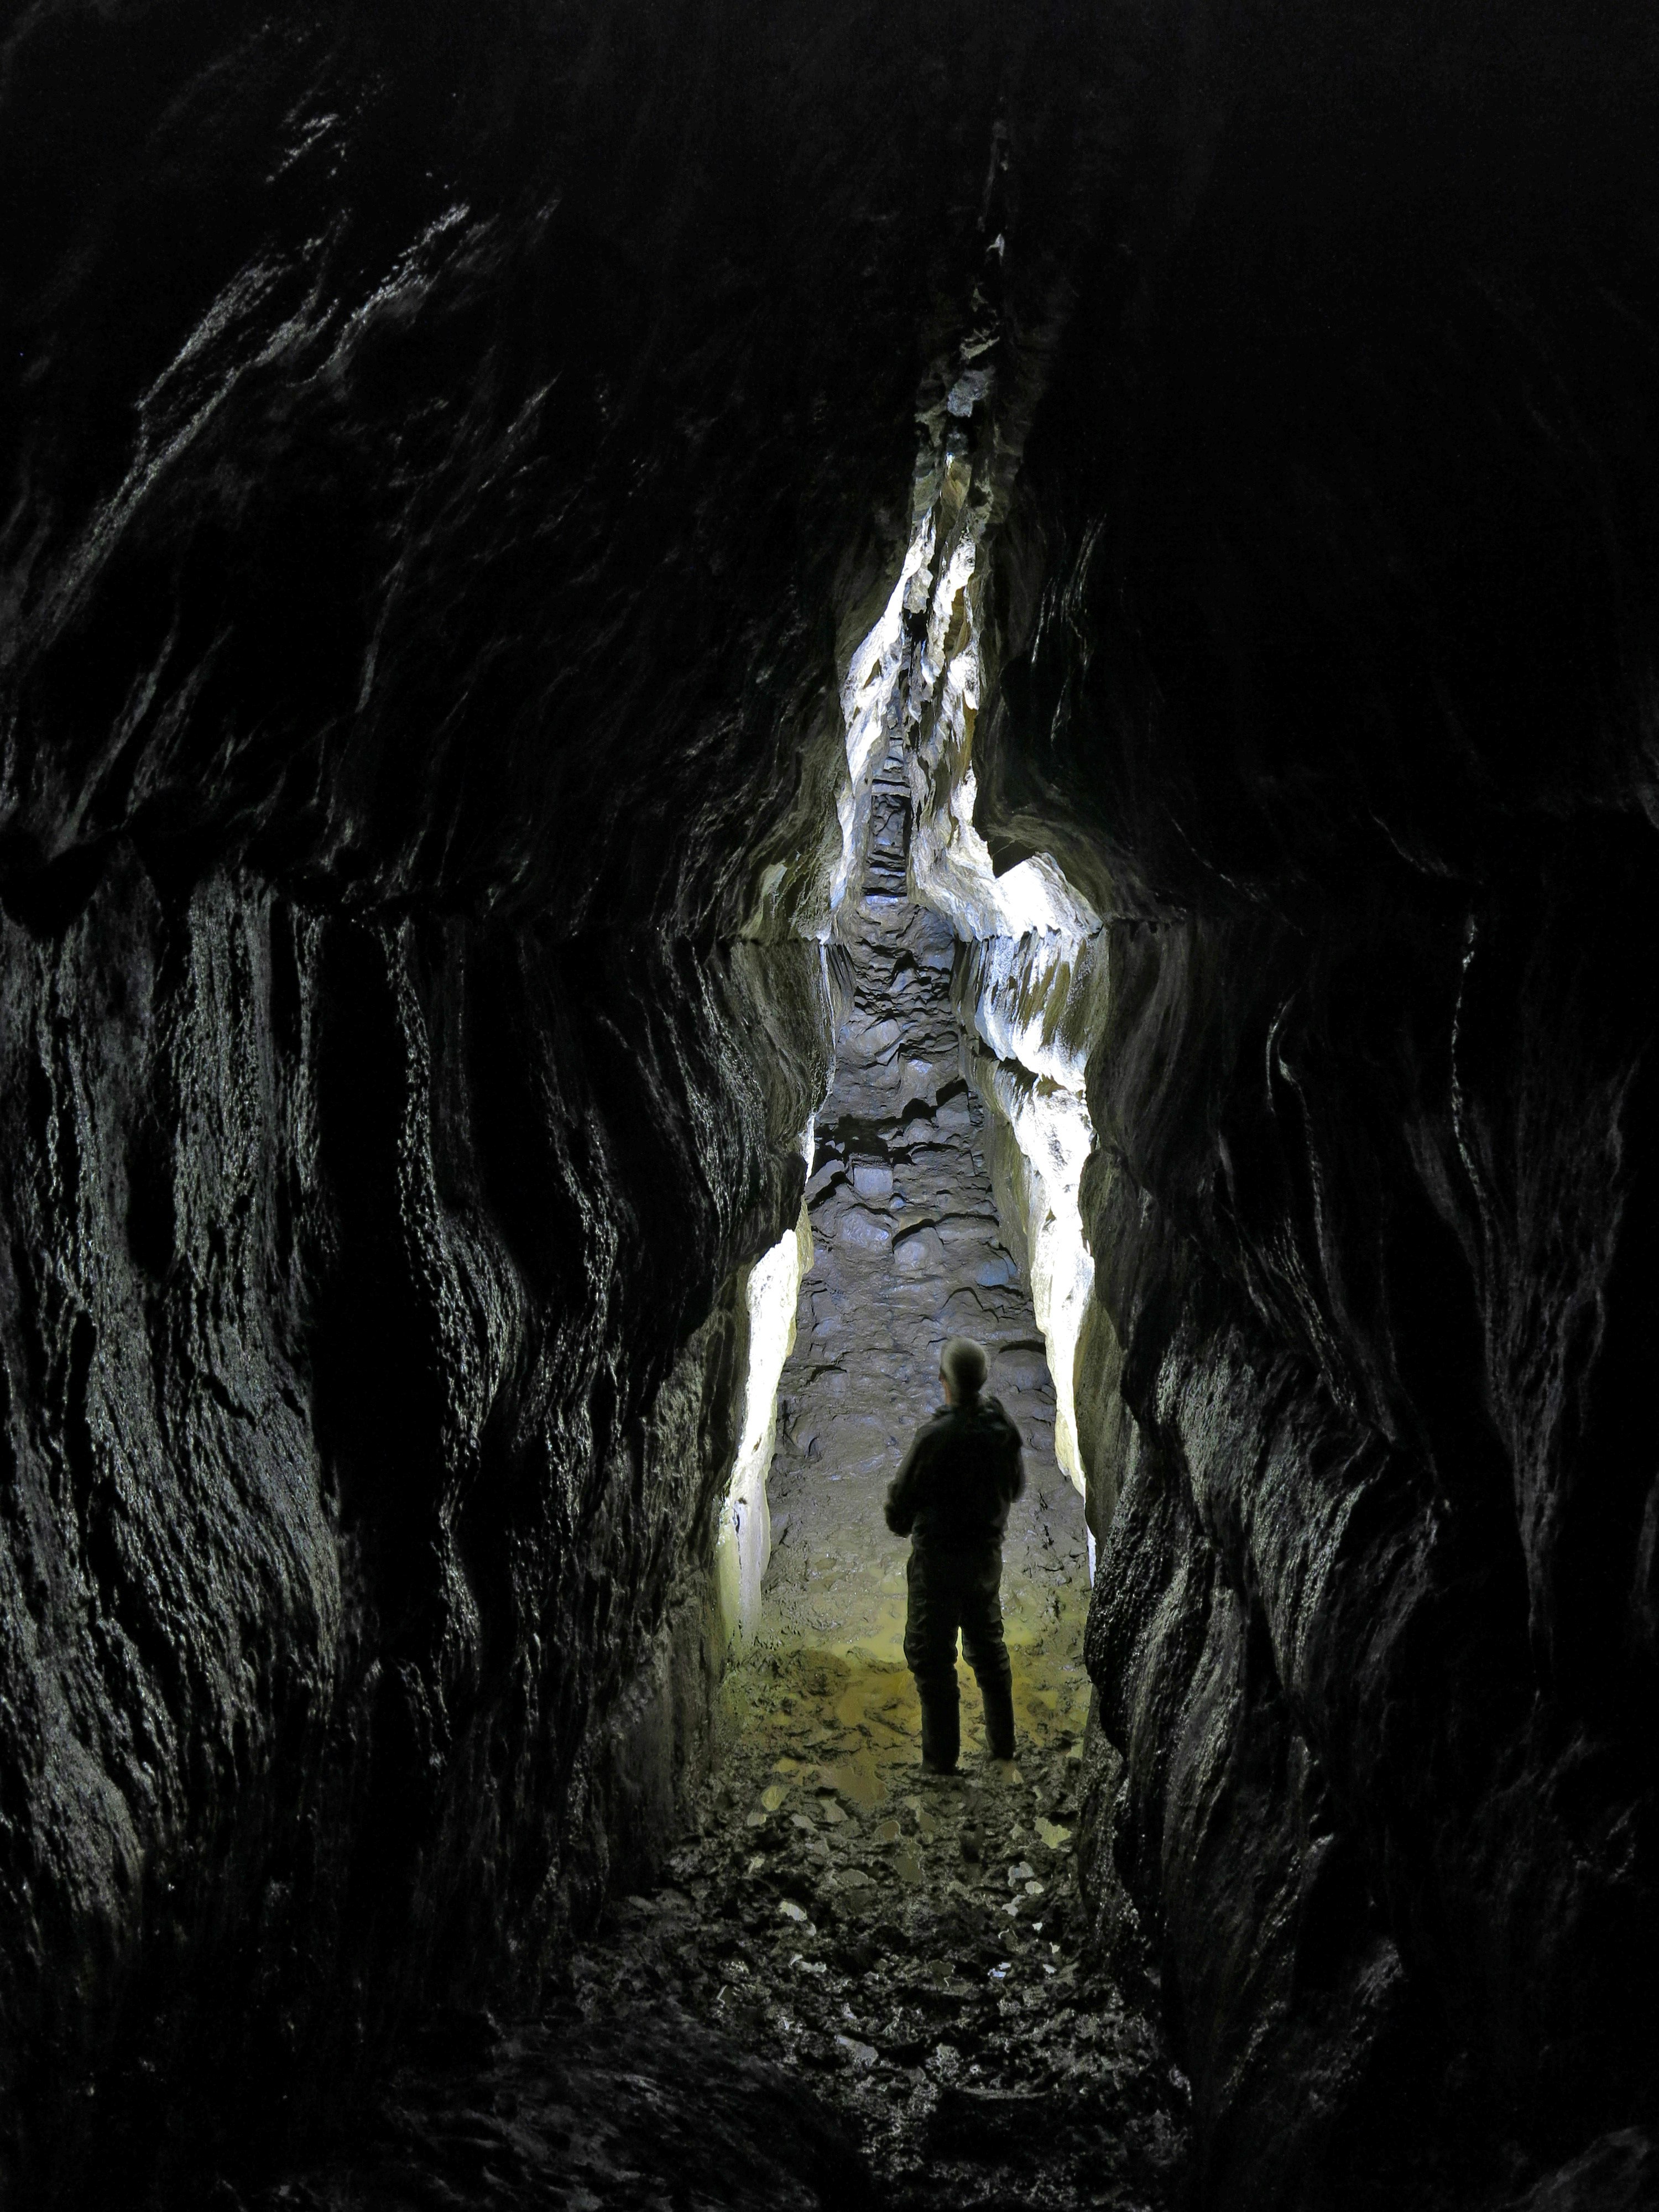 Interior of the Oweynagat cave, supposed Gate to Hell located in Roscommon, Ireland.